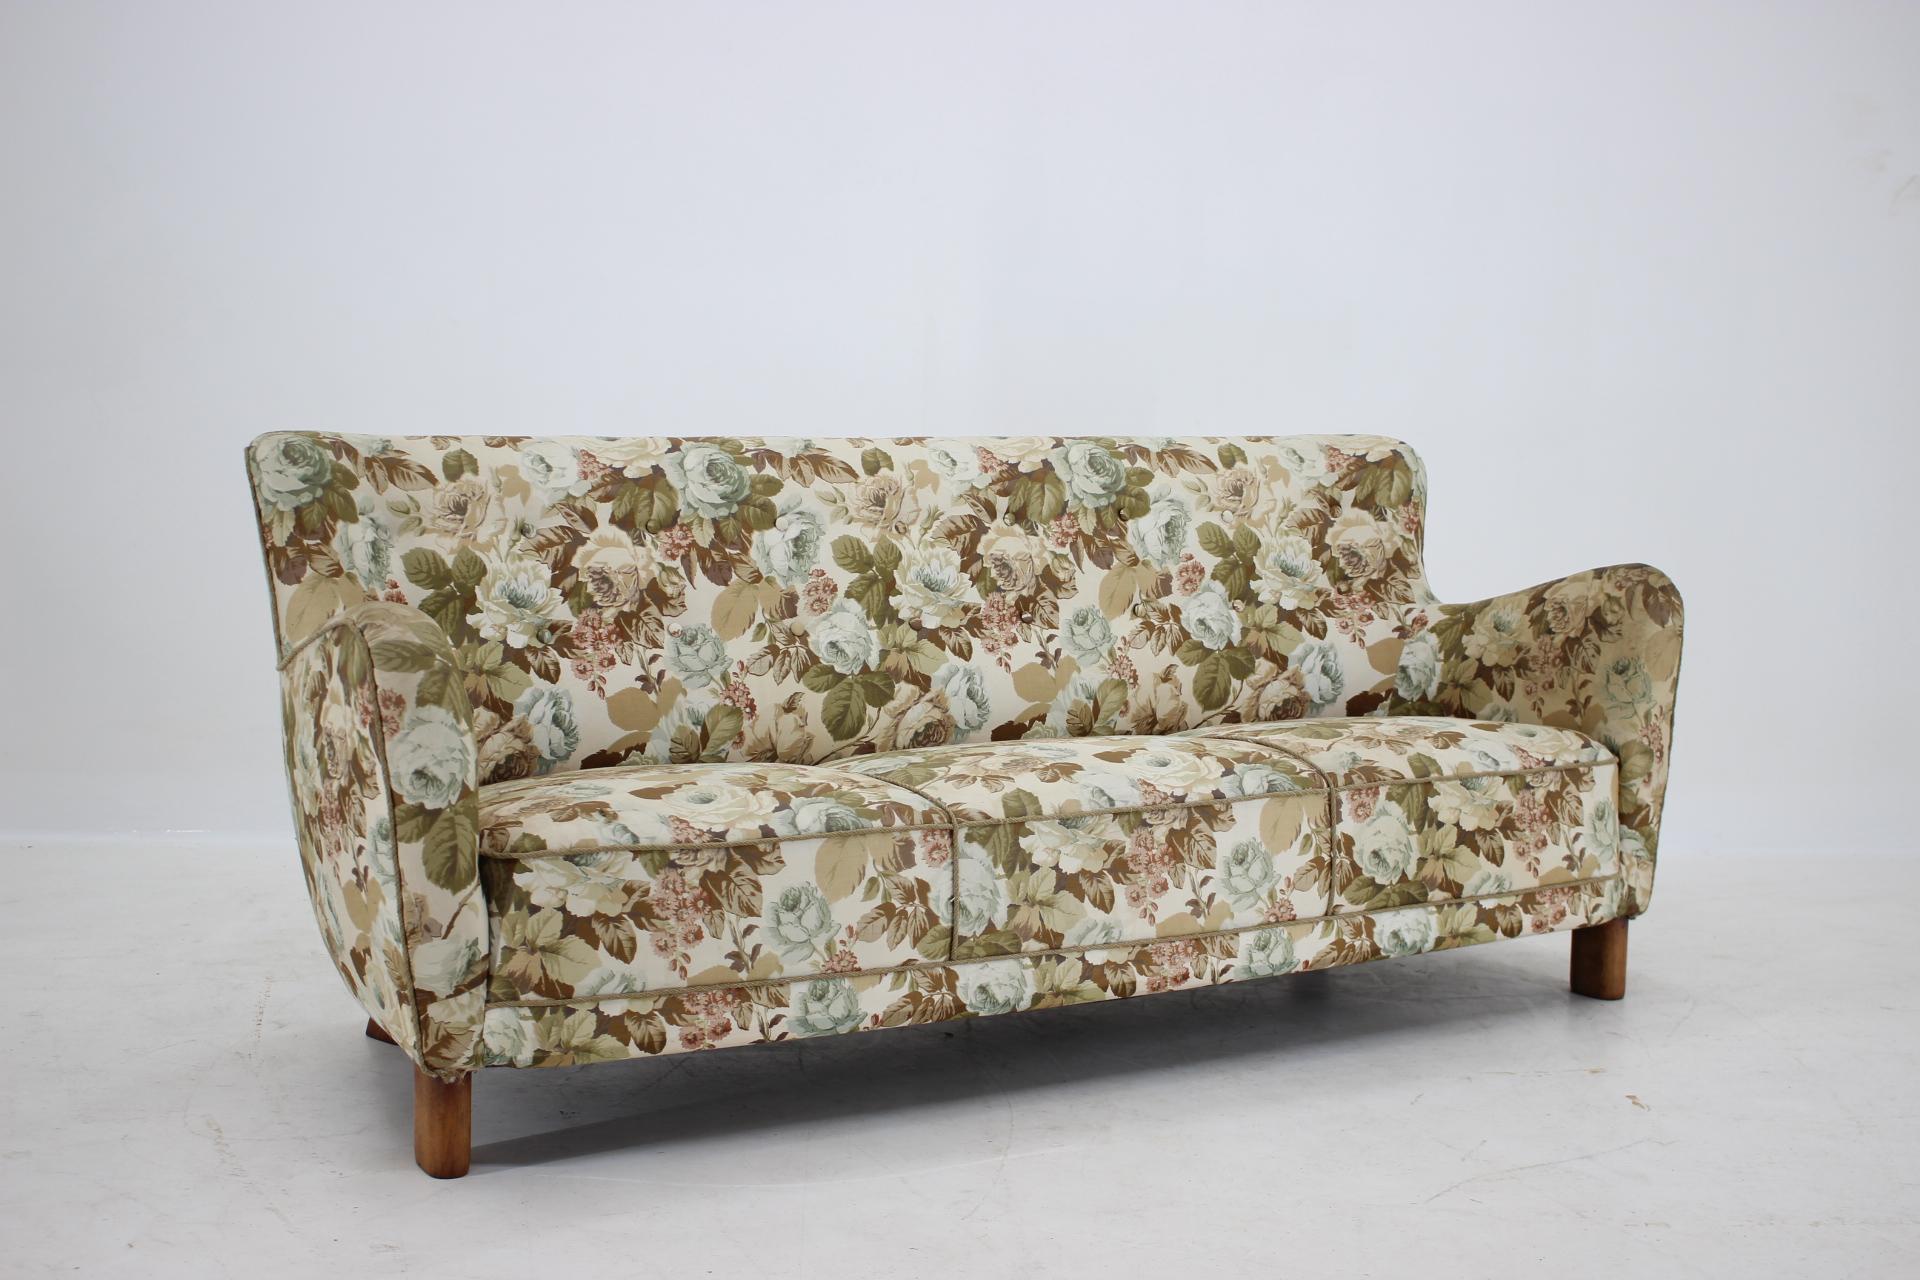 - Good original condition/structurally stabile 
- Suitable to be newly upholstered.